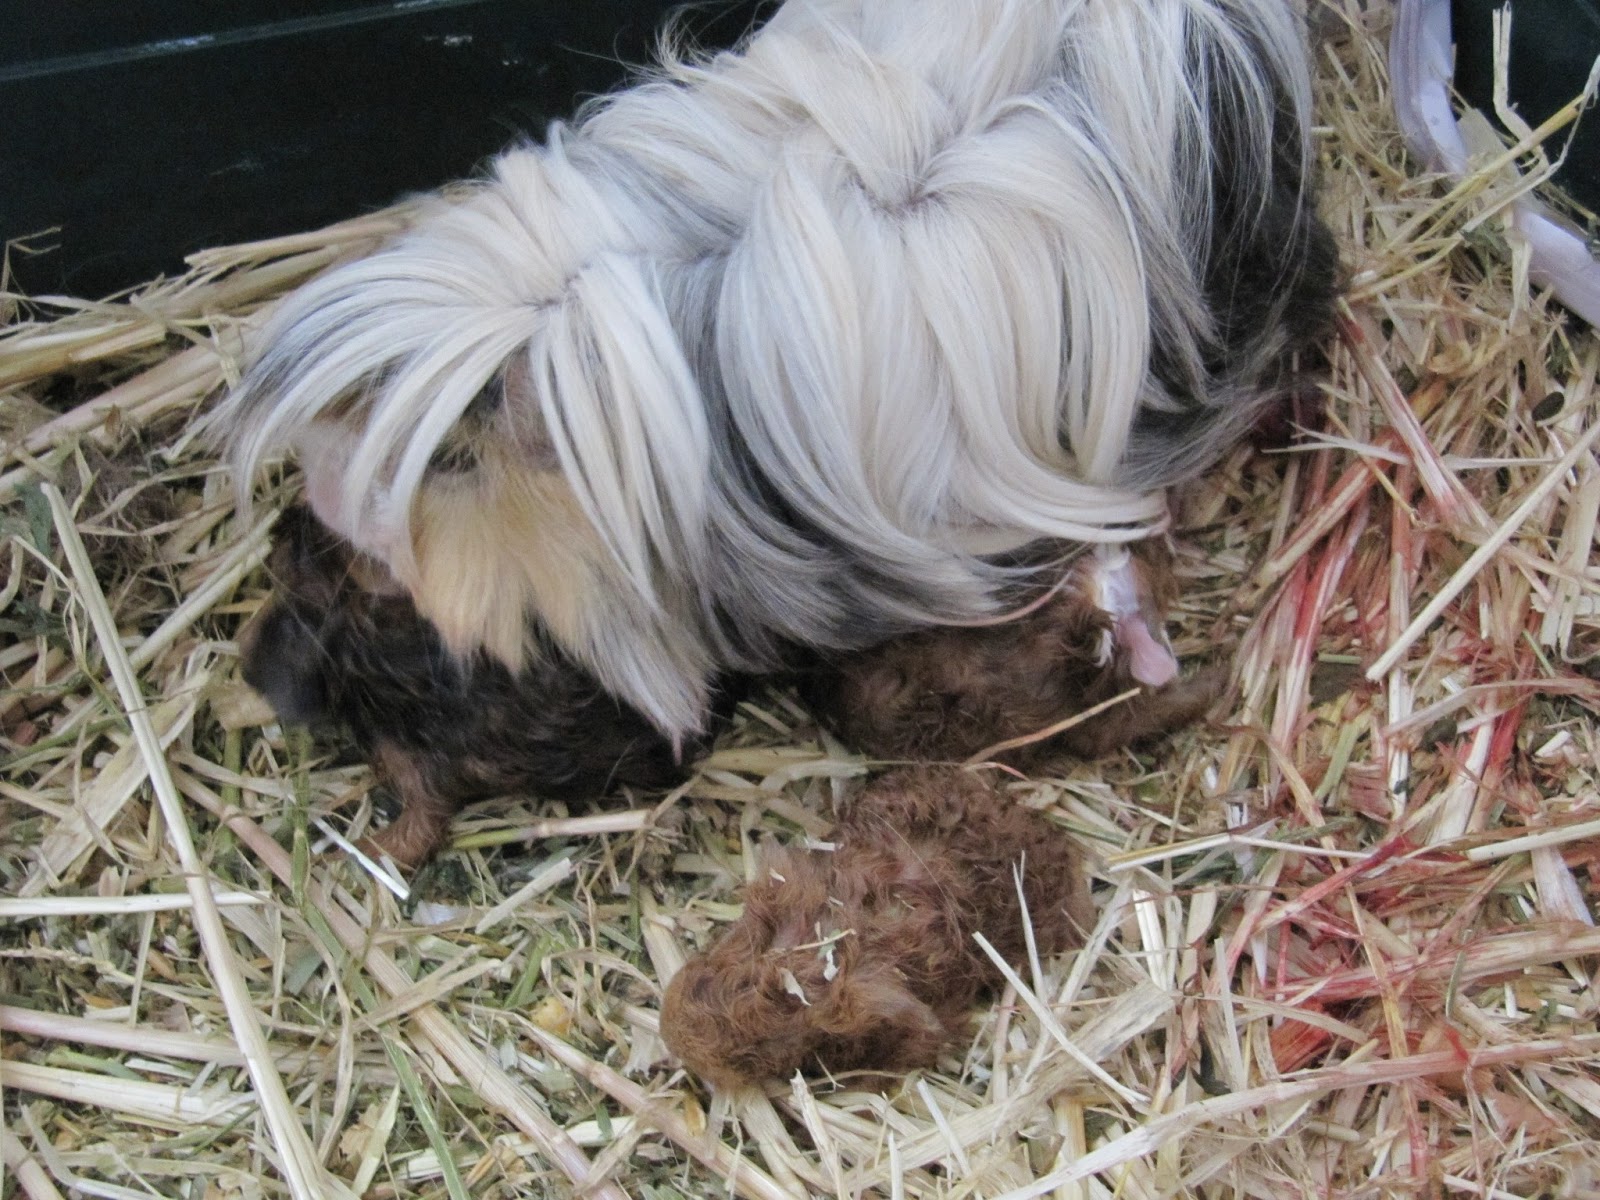 How do I know when my guinea pig will give birth?